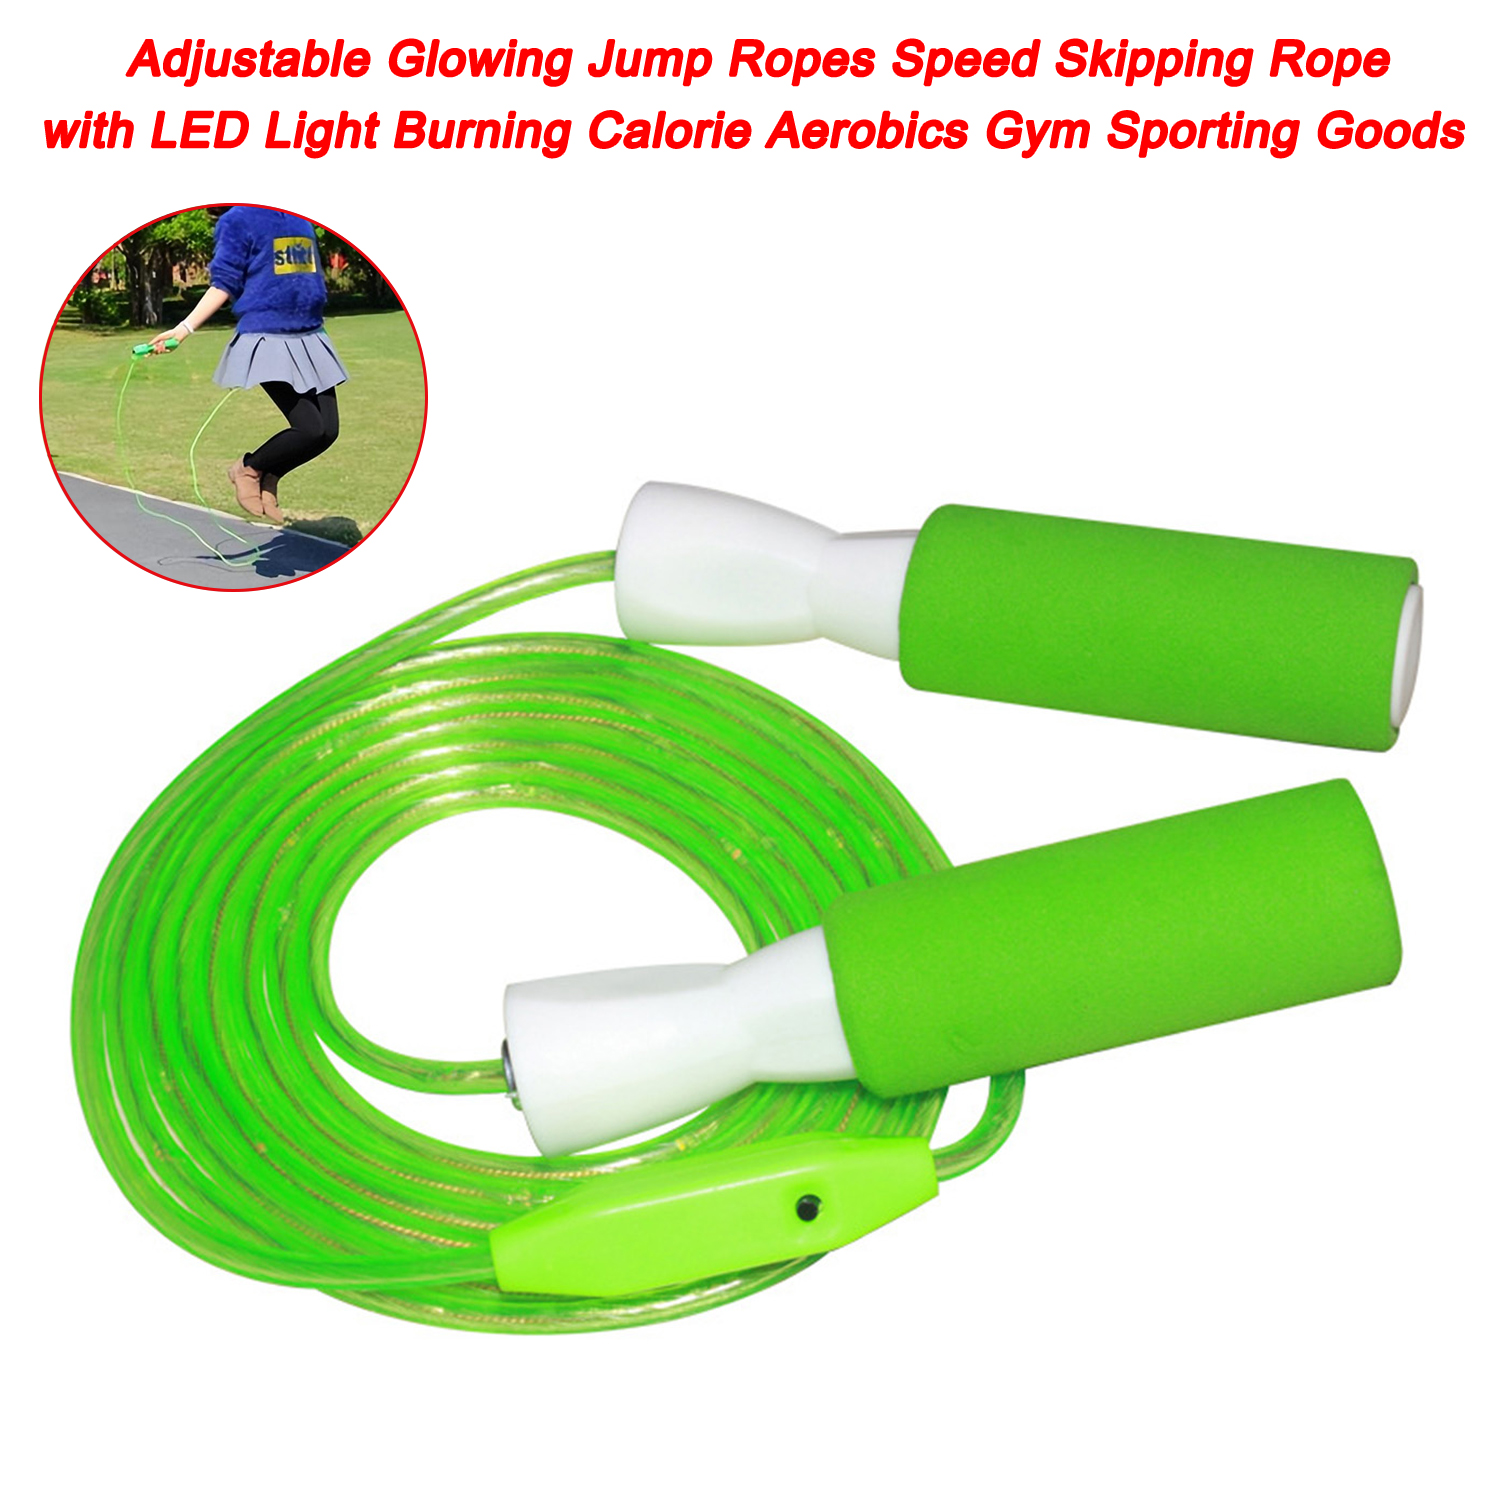 Adjustable Glowing Jump Ropes Speed Skipping Rope with LED Light Burning Calorie Aerobics Gym Sporting Goods